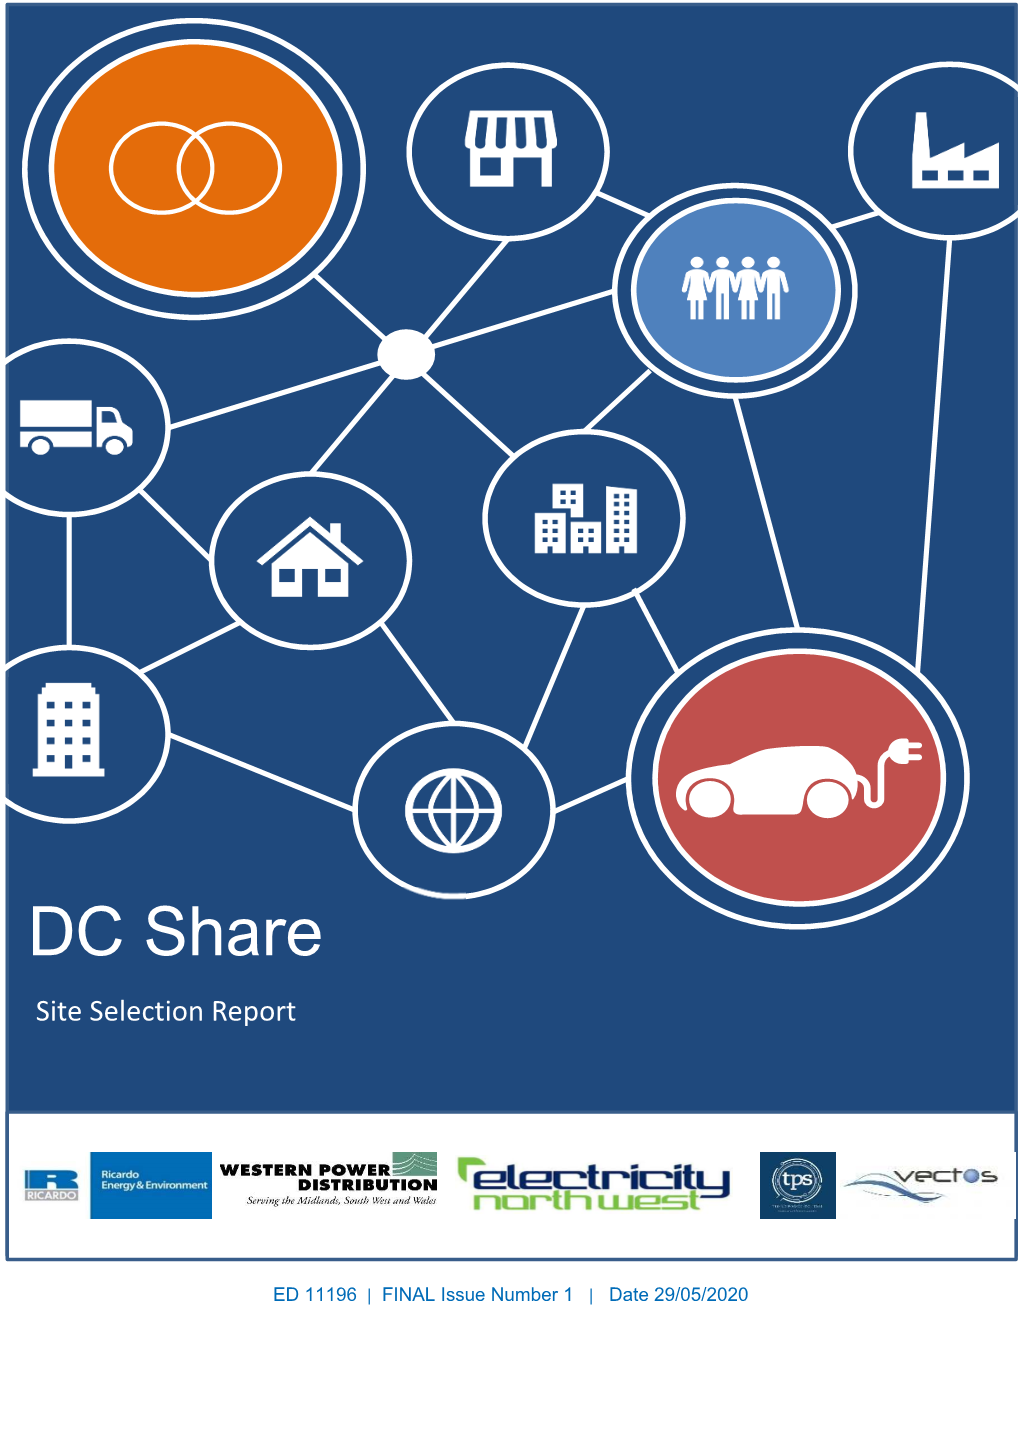 DC Share Site Selection Report ______Report for Western Power Distribution Network Innovation Competition